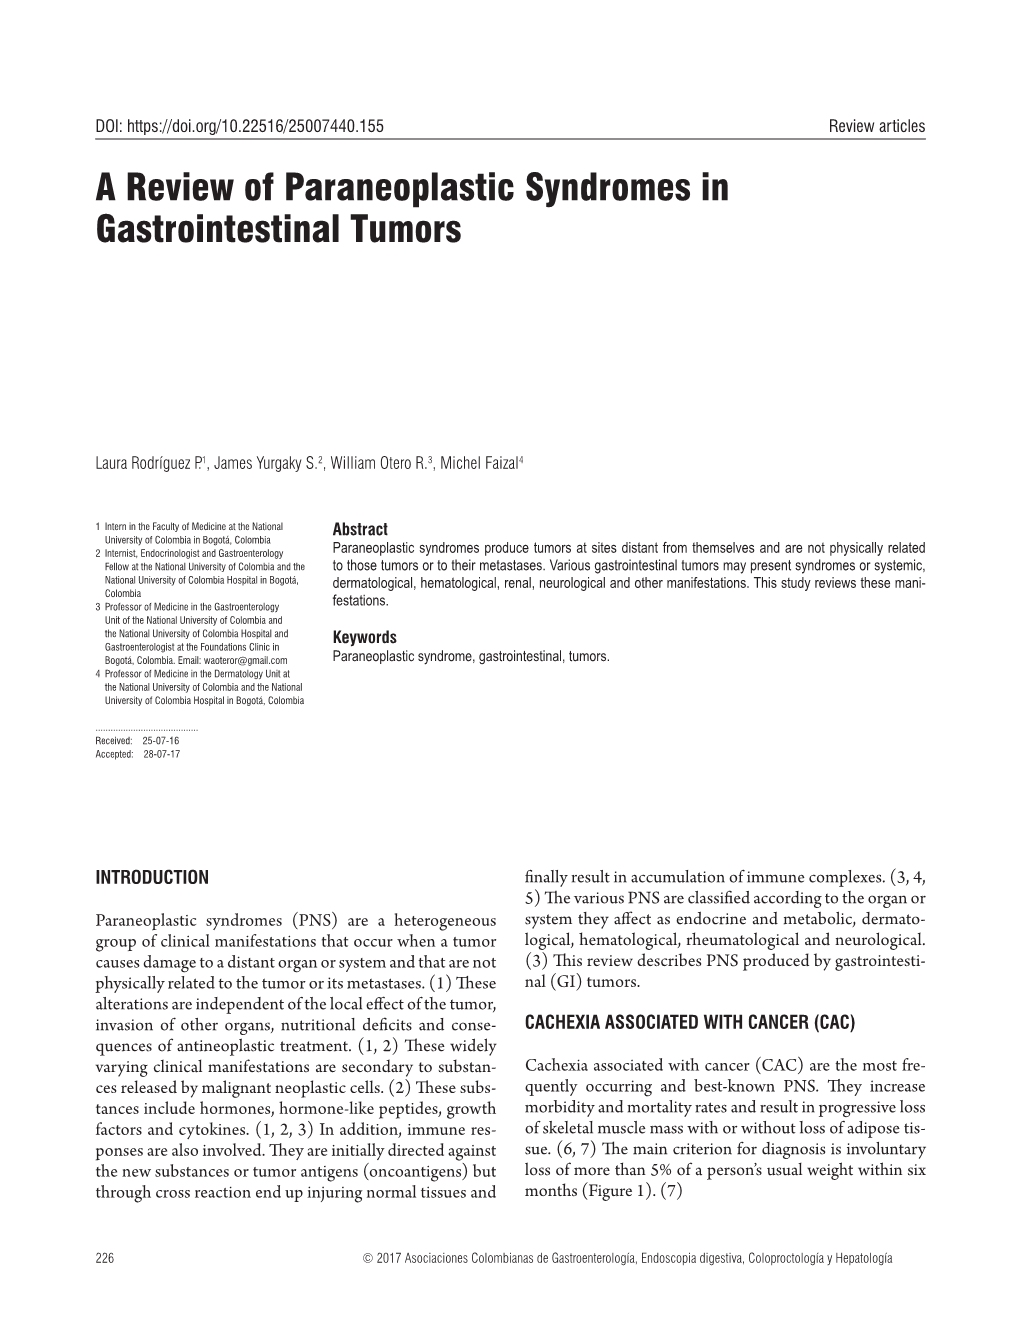 A Review of Paraneoplastic Syndromes in Gastrointestinal Tumors